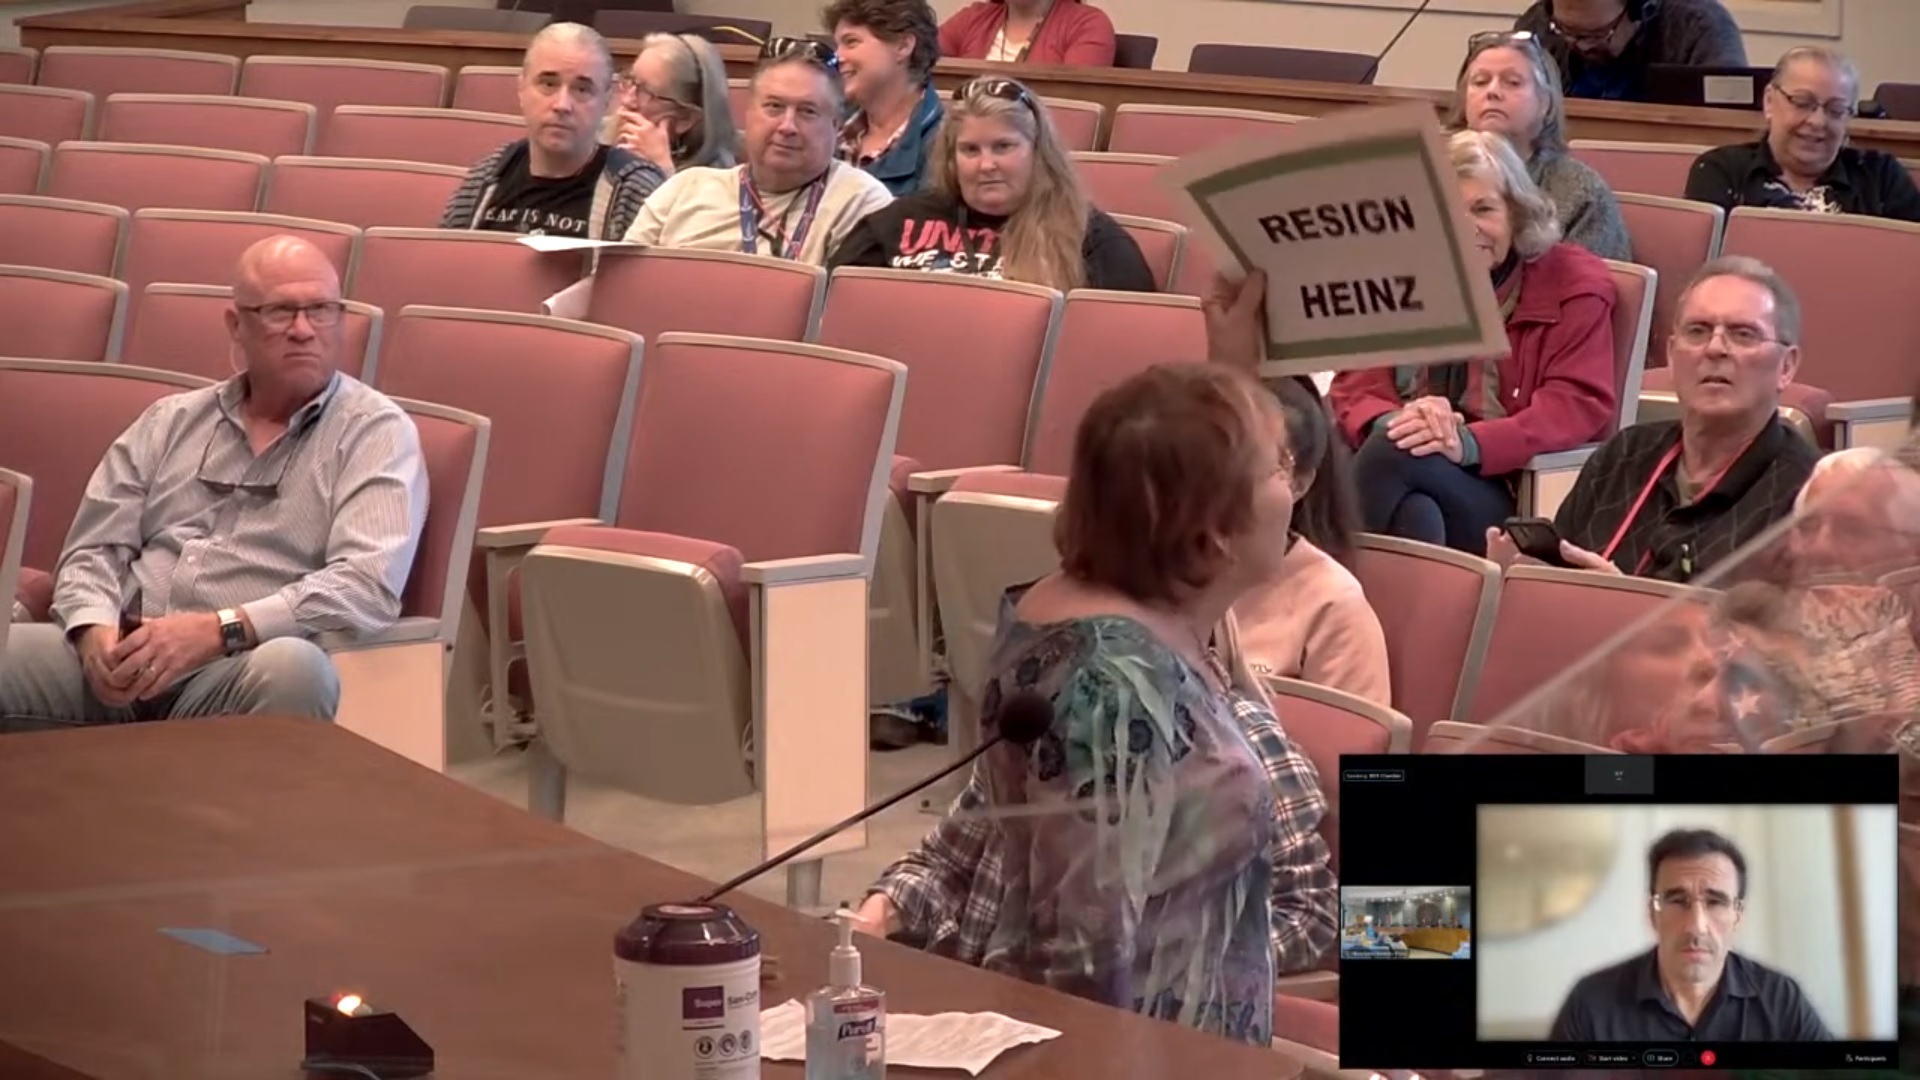 Shirley Requard displays a "Resign Heinz" sign at a Pima County Board of Supervisors meeting on February 21, 2023, as supervisor Matt Heinz watches (lower right).